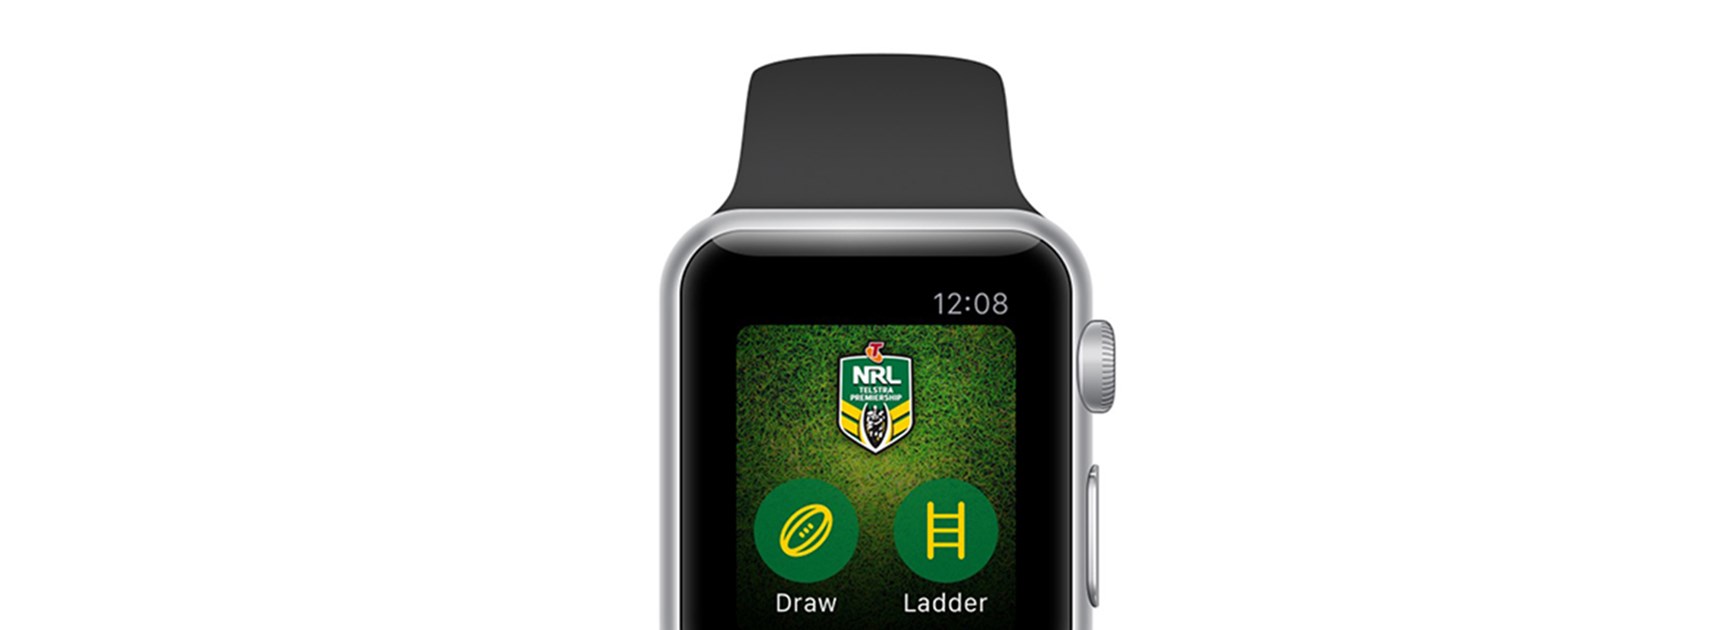 The NRL Official App is now available on the Apple Watch.